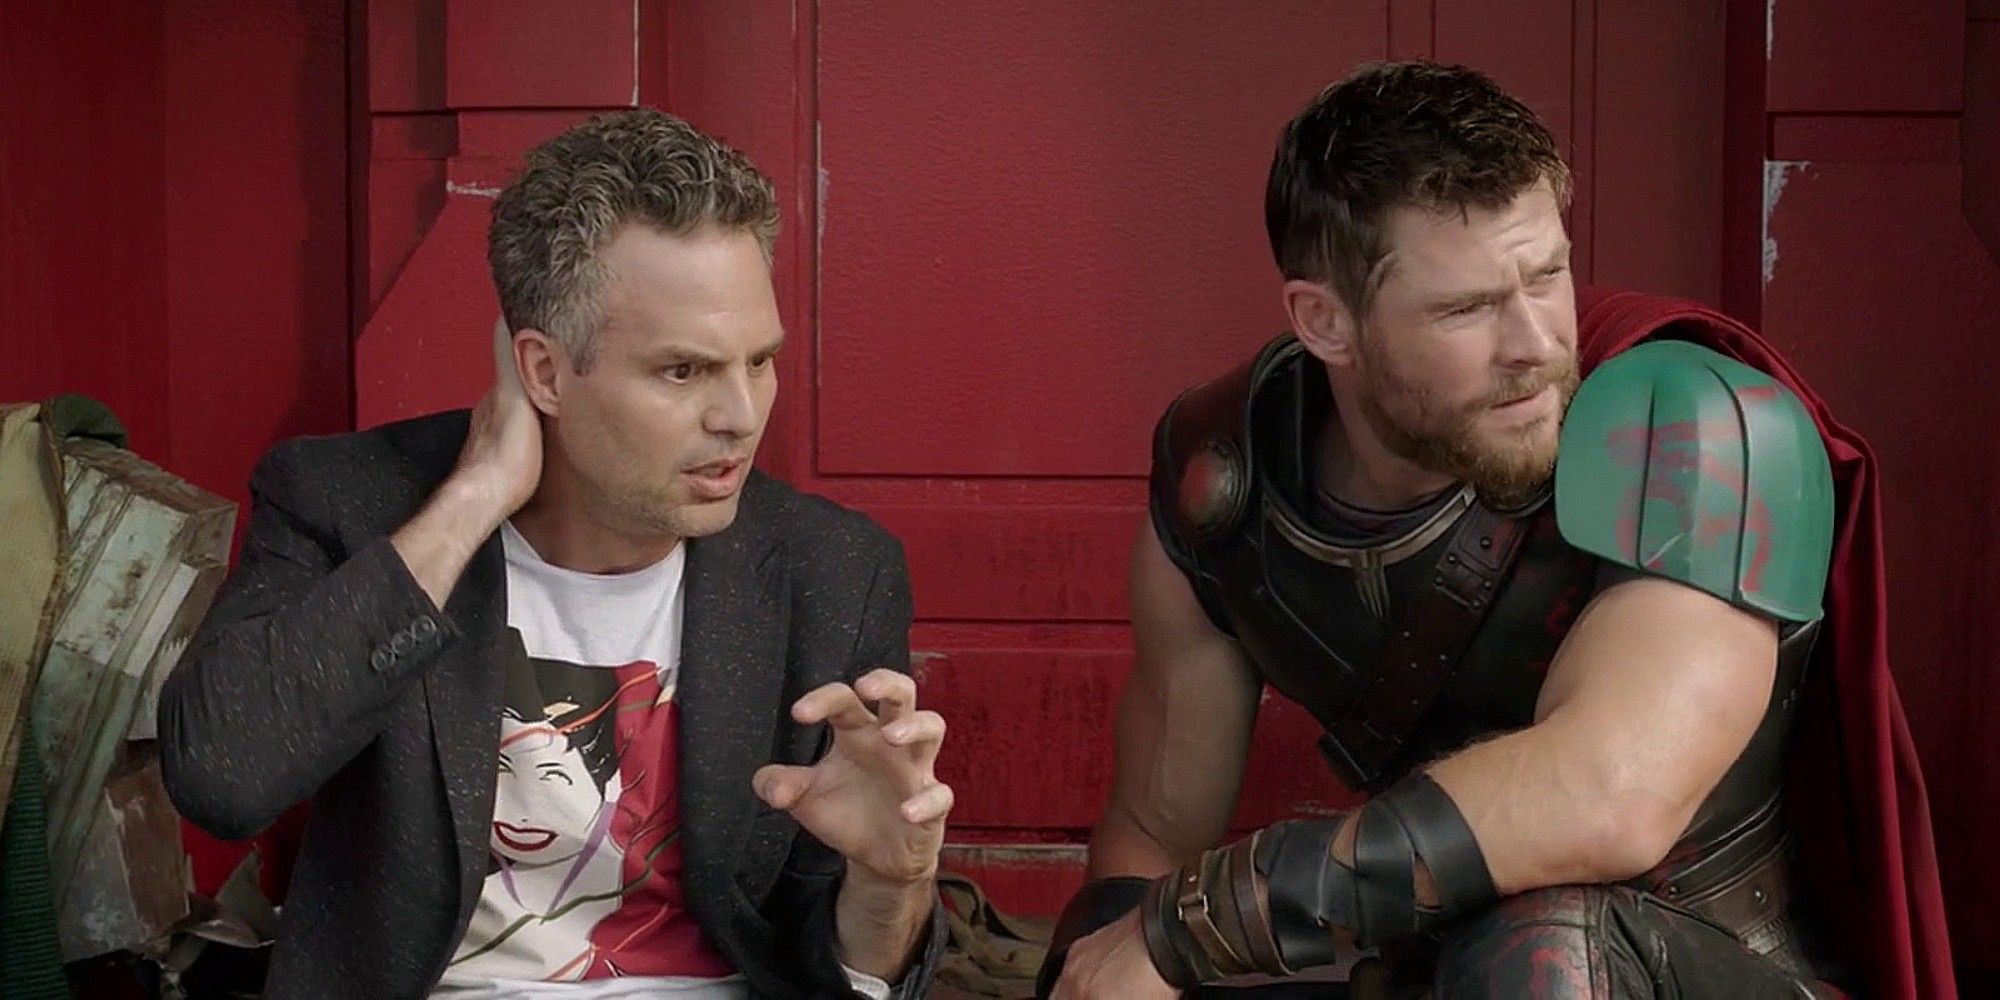 thor and bruce from thor: ragnarok